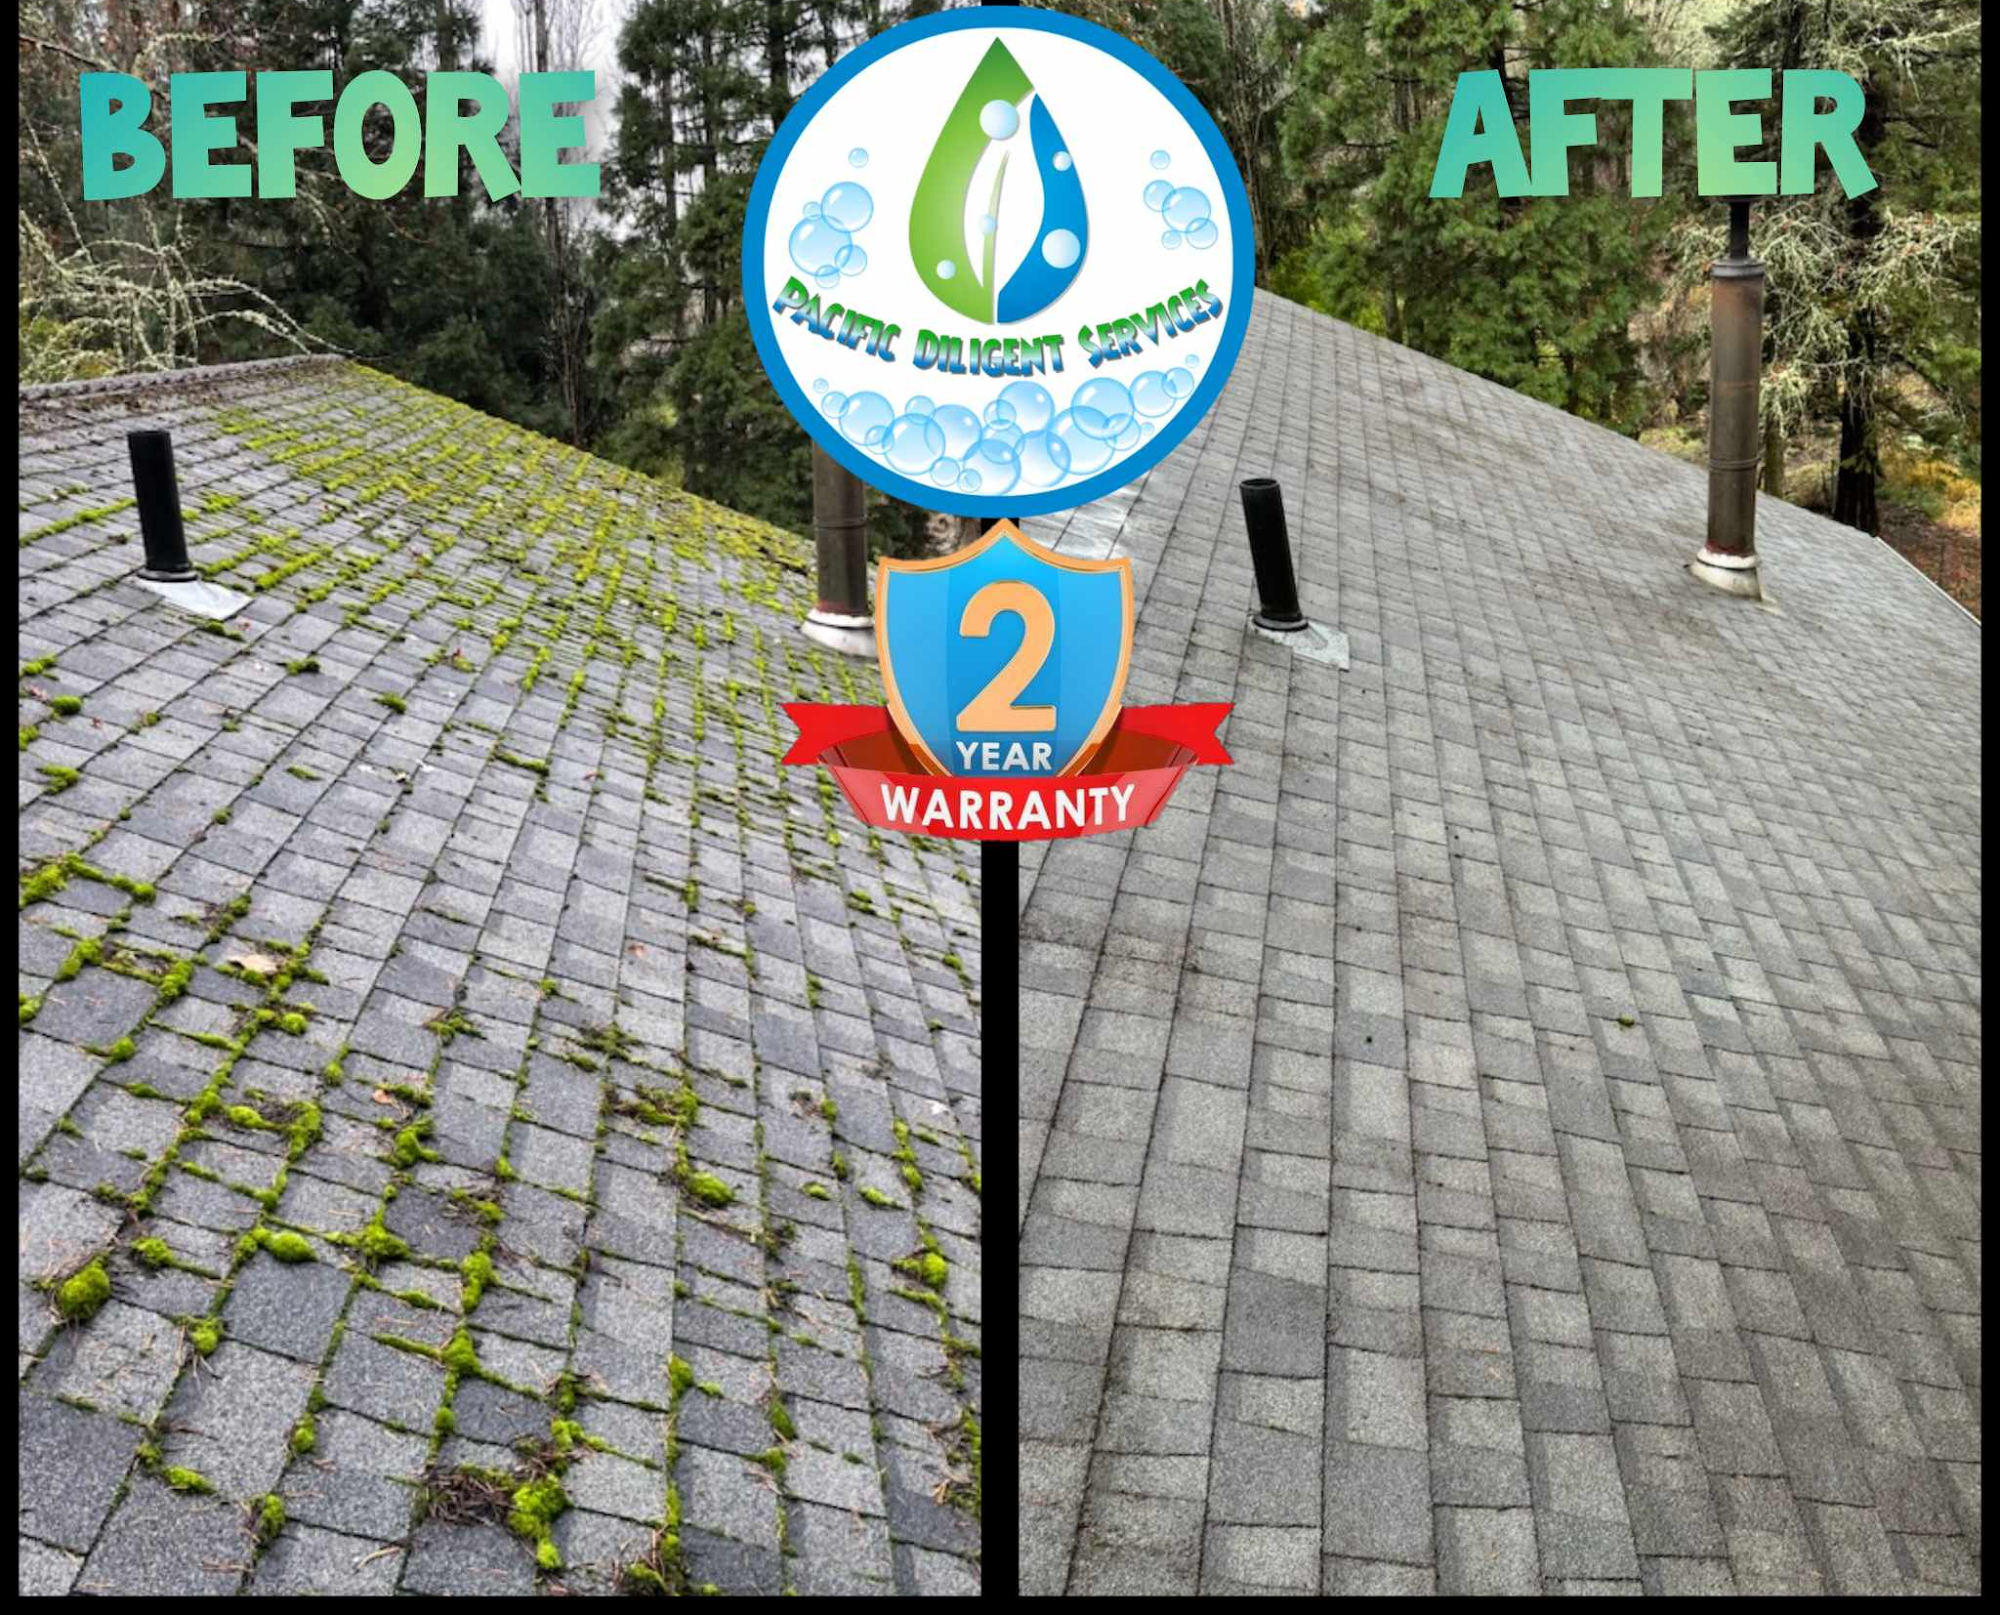 Pacific Diligent Services Roof Moss Removal & Gutter Cleaning